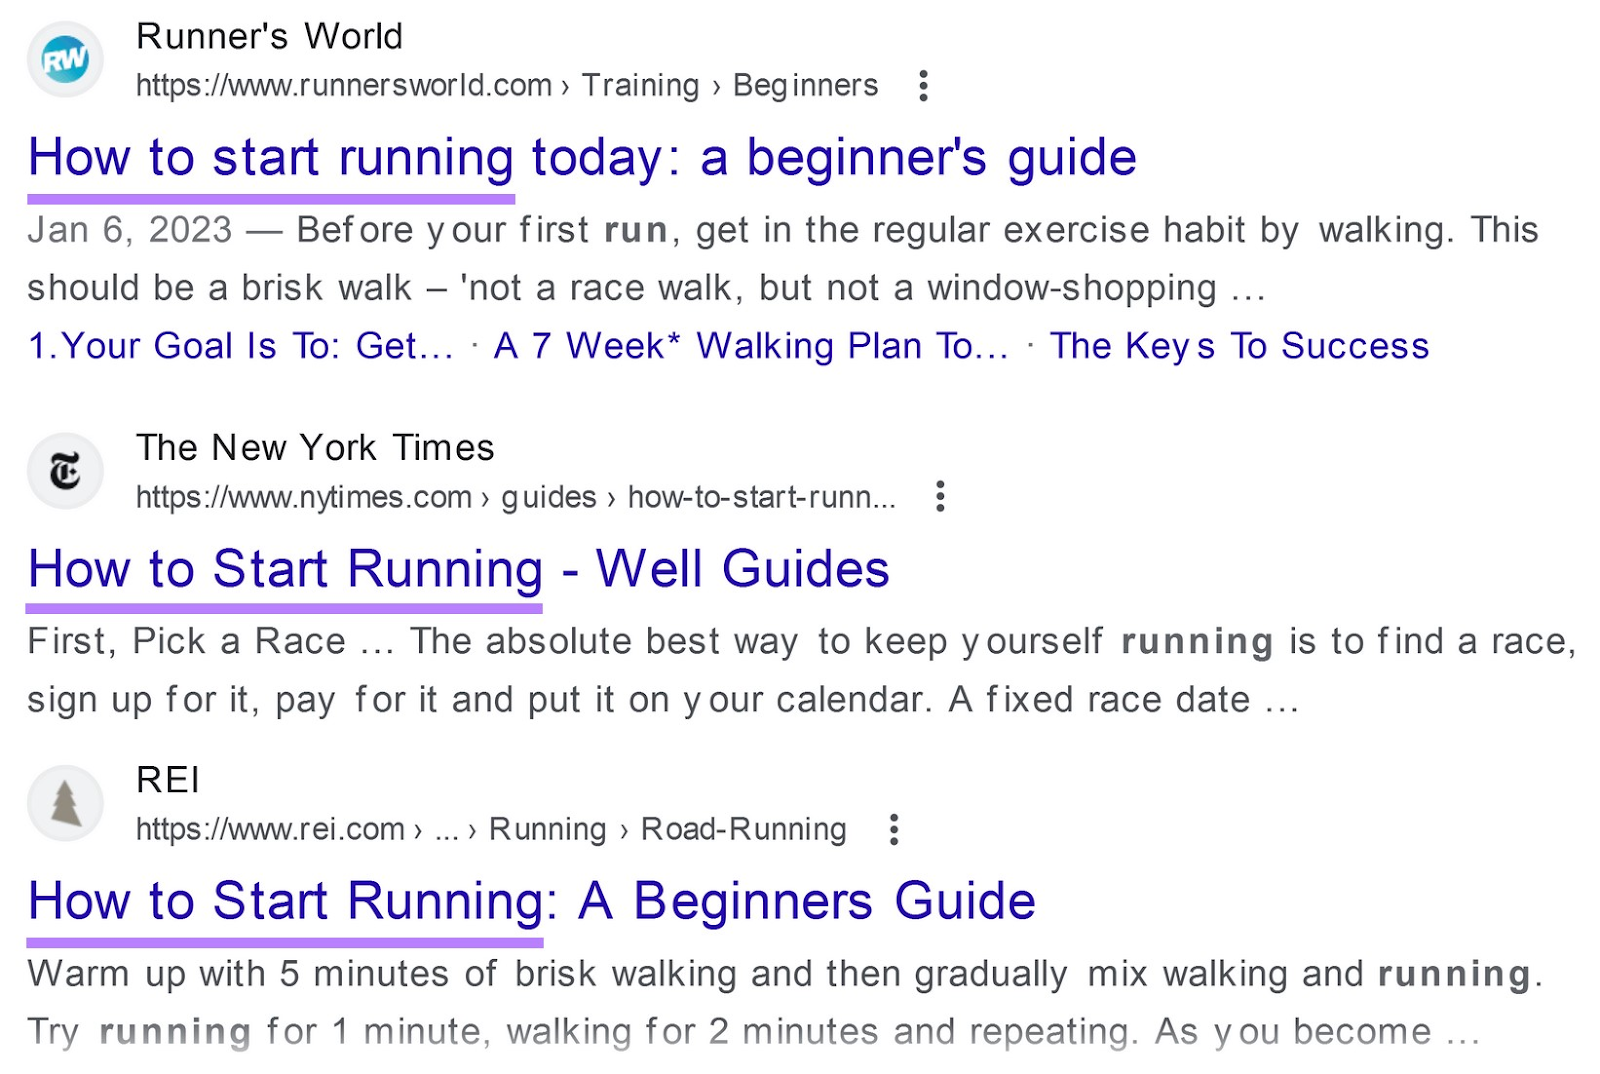 Google SERP for “how to start running” with title tags highlighted in purple